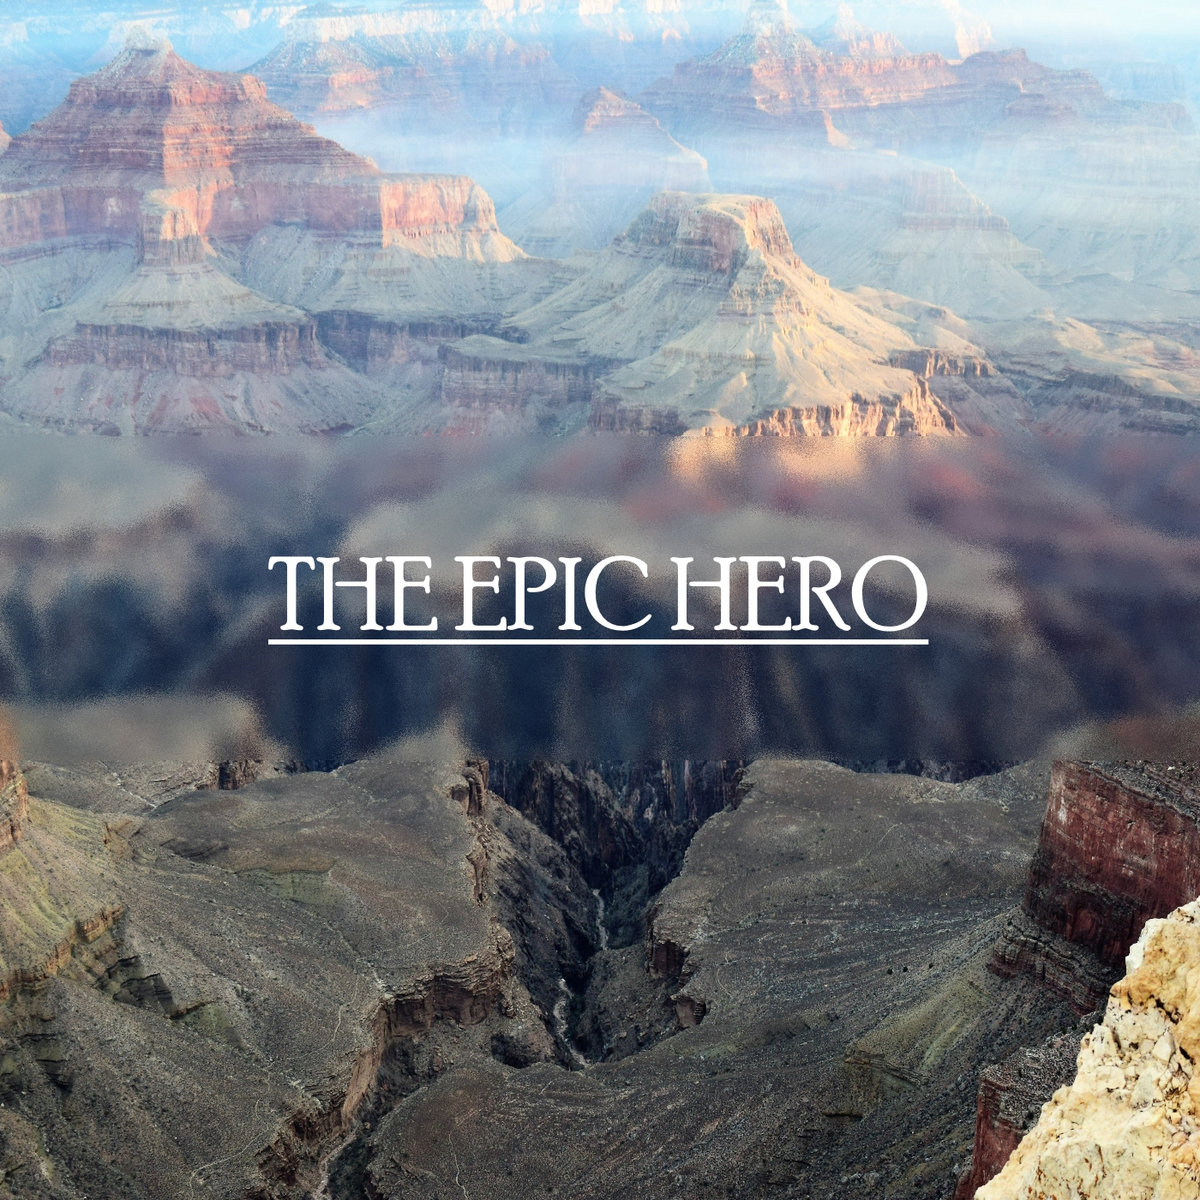 meaning of epic hero